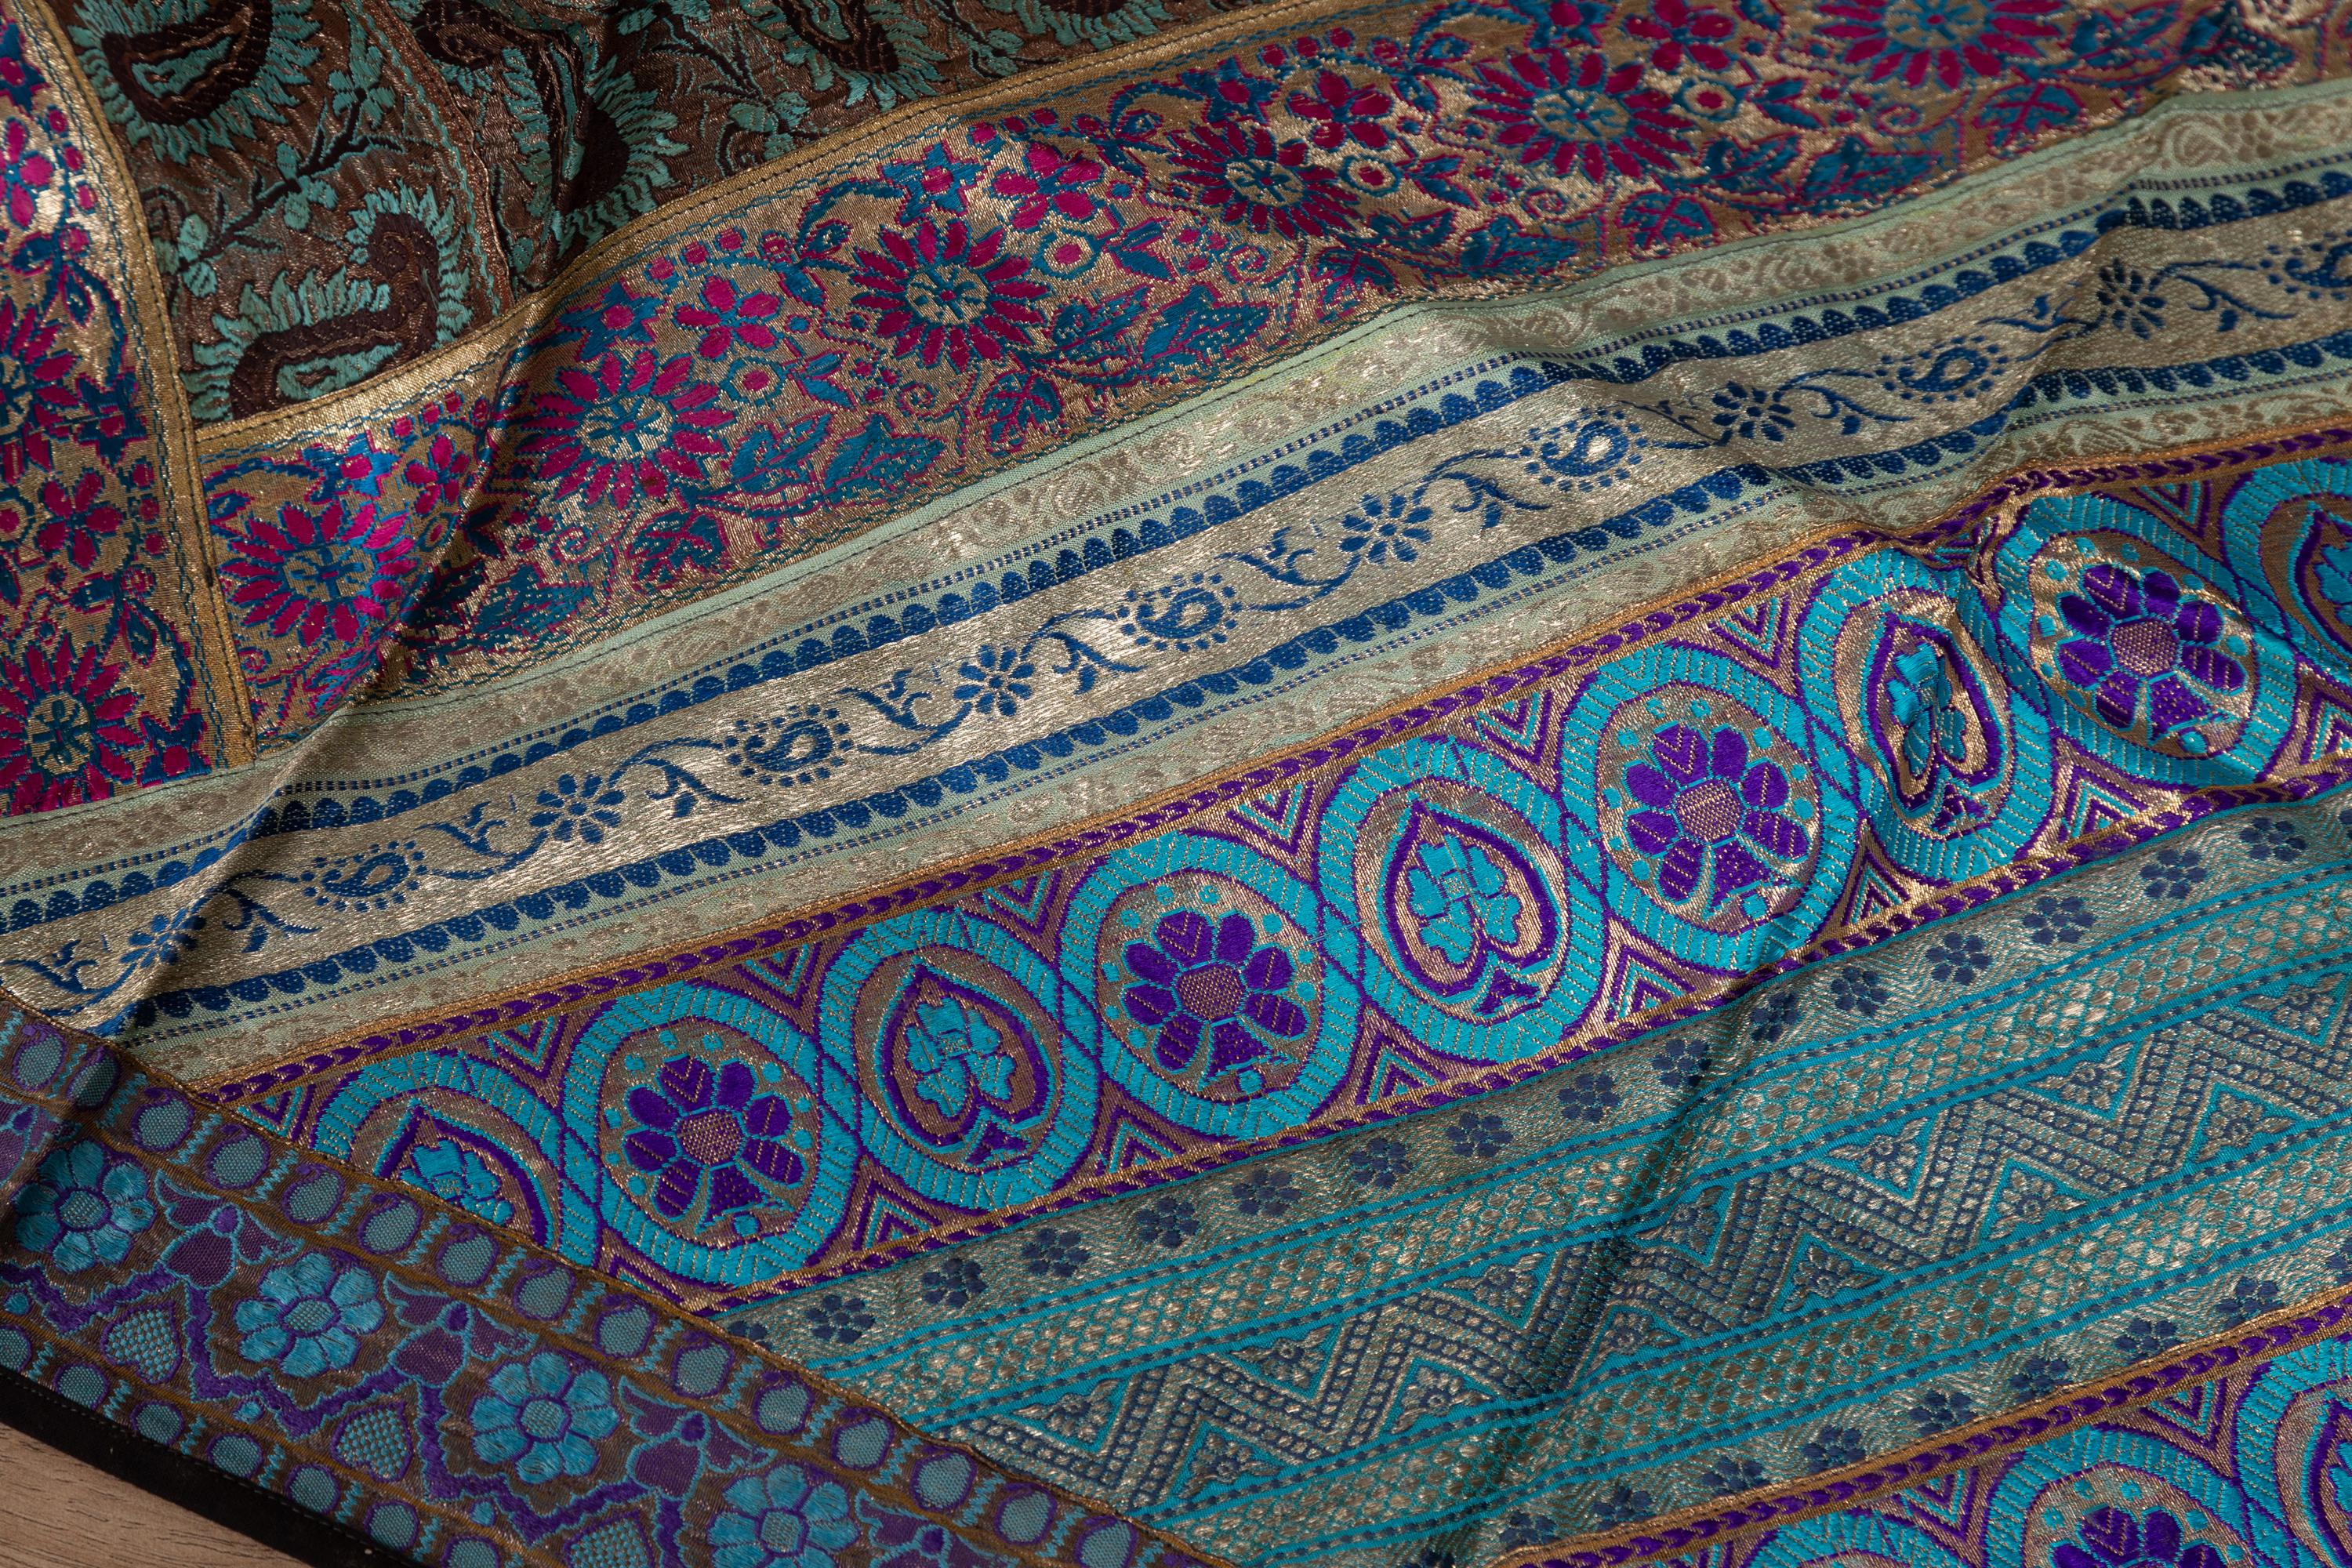 Vintage Indian Silk Embroidered Fabric with Turquoise, Violet and Gold Tones 3